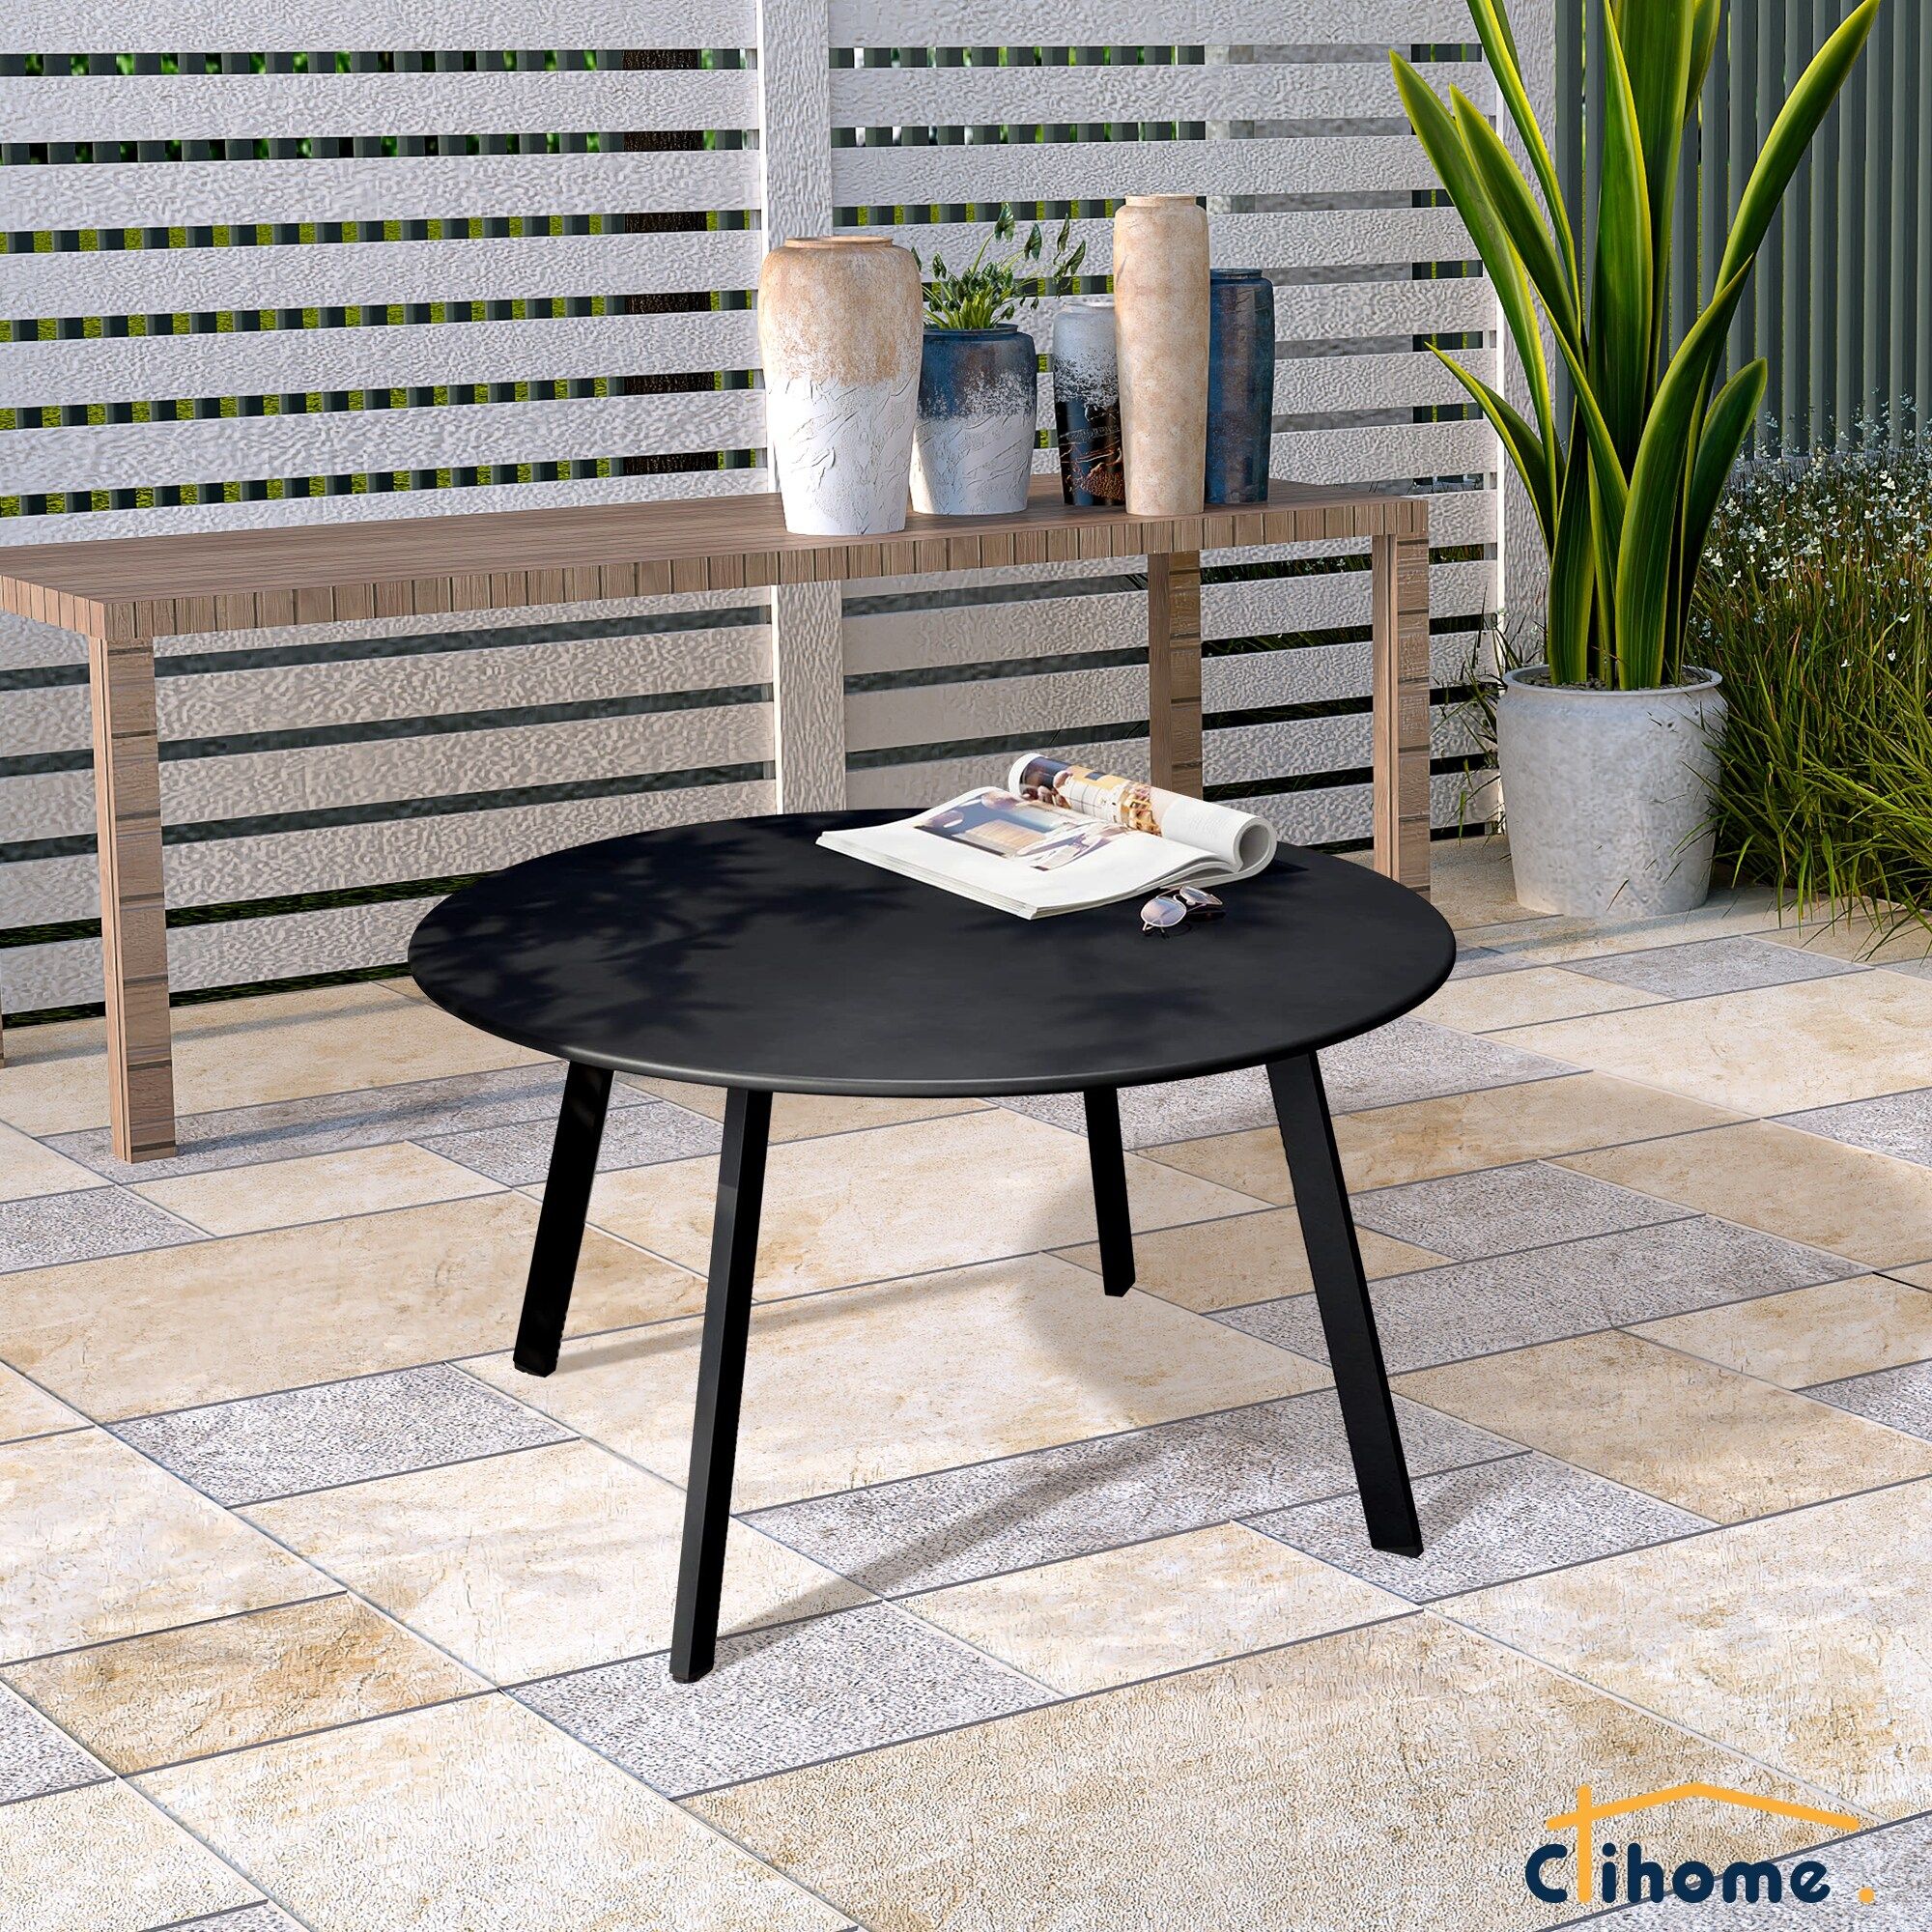 Clihome Weather Resistant Round Steel Patio Large Coffee Table – On Sale –  Bed Bath & Beyond – 36089720 Inside Round Steel Patio Coffee Tables (View 2 of 15)